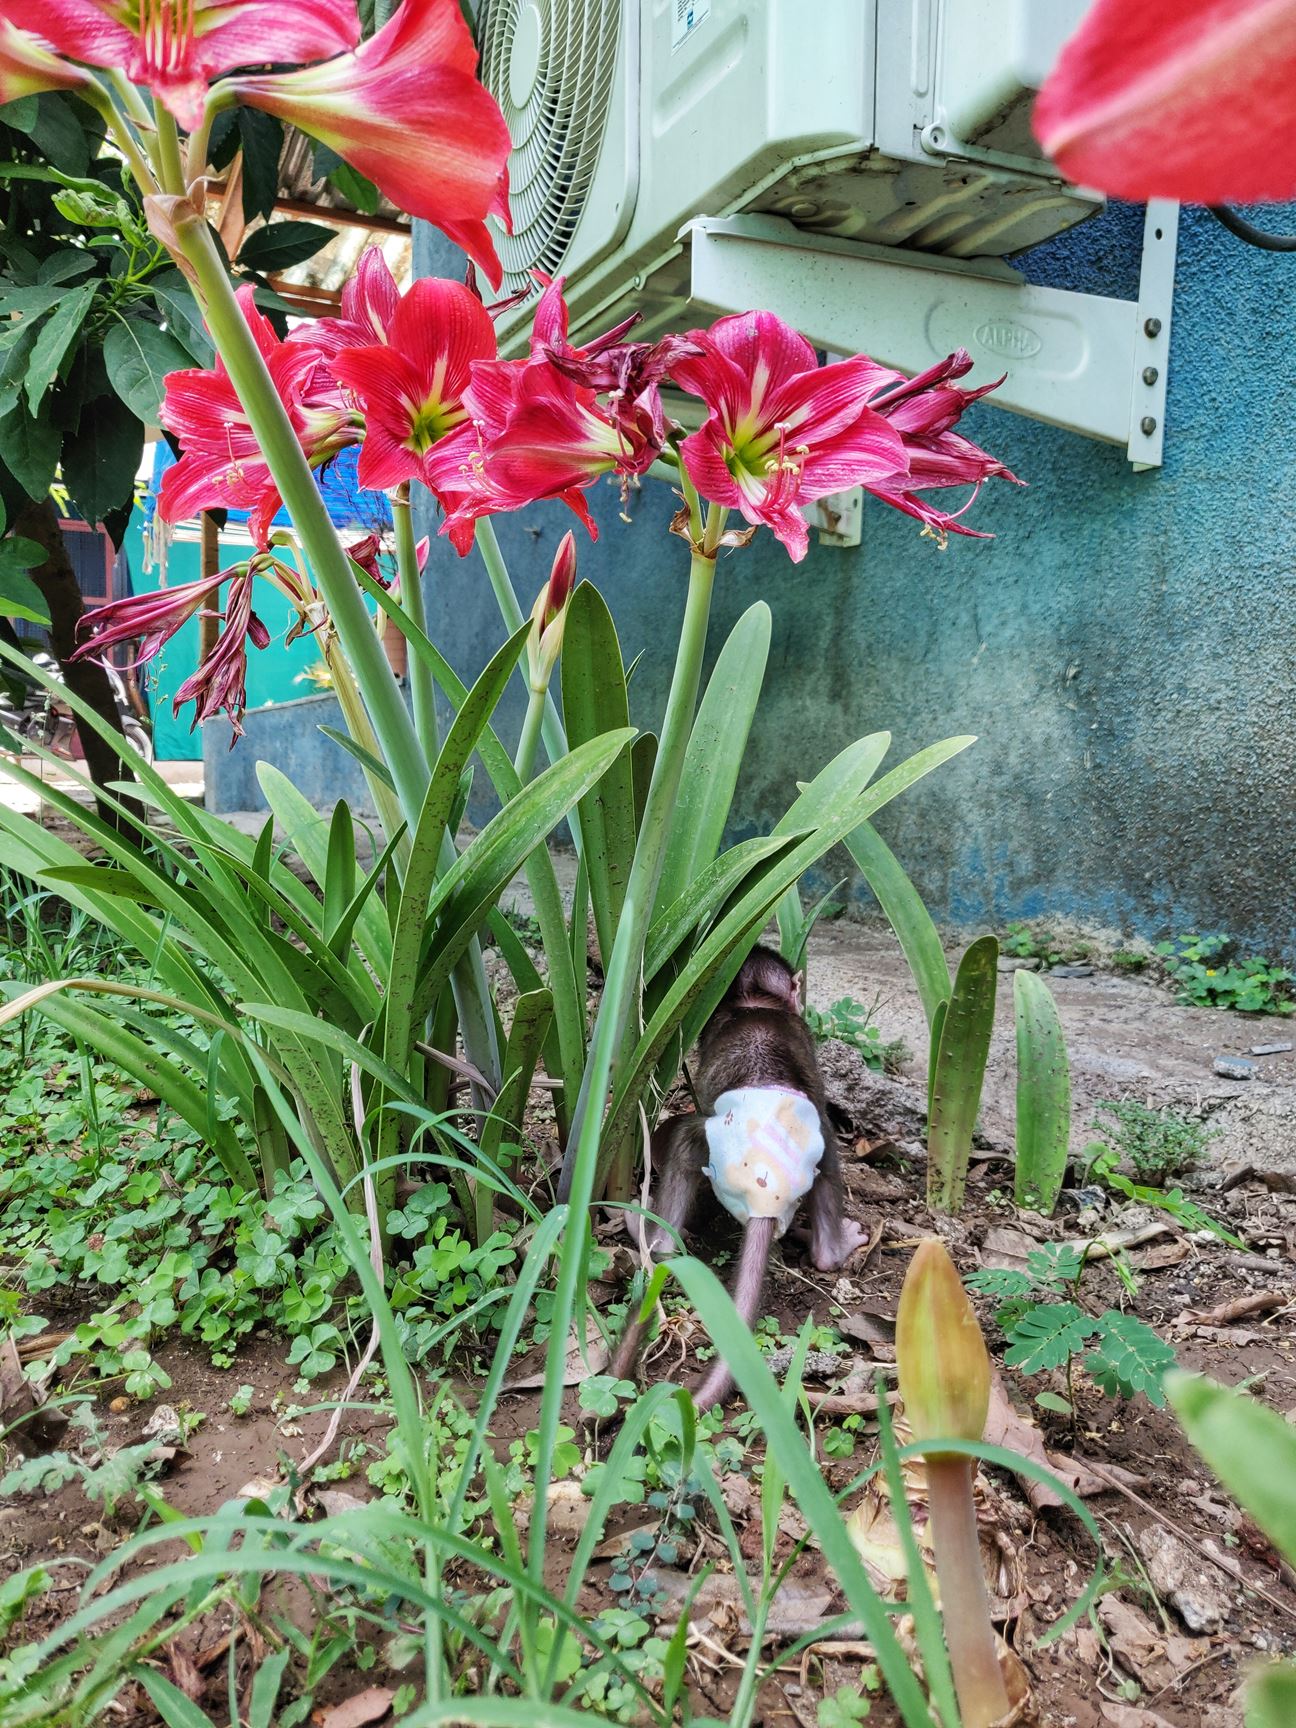 A diaper clad monkey butt among the flowers